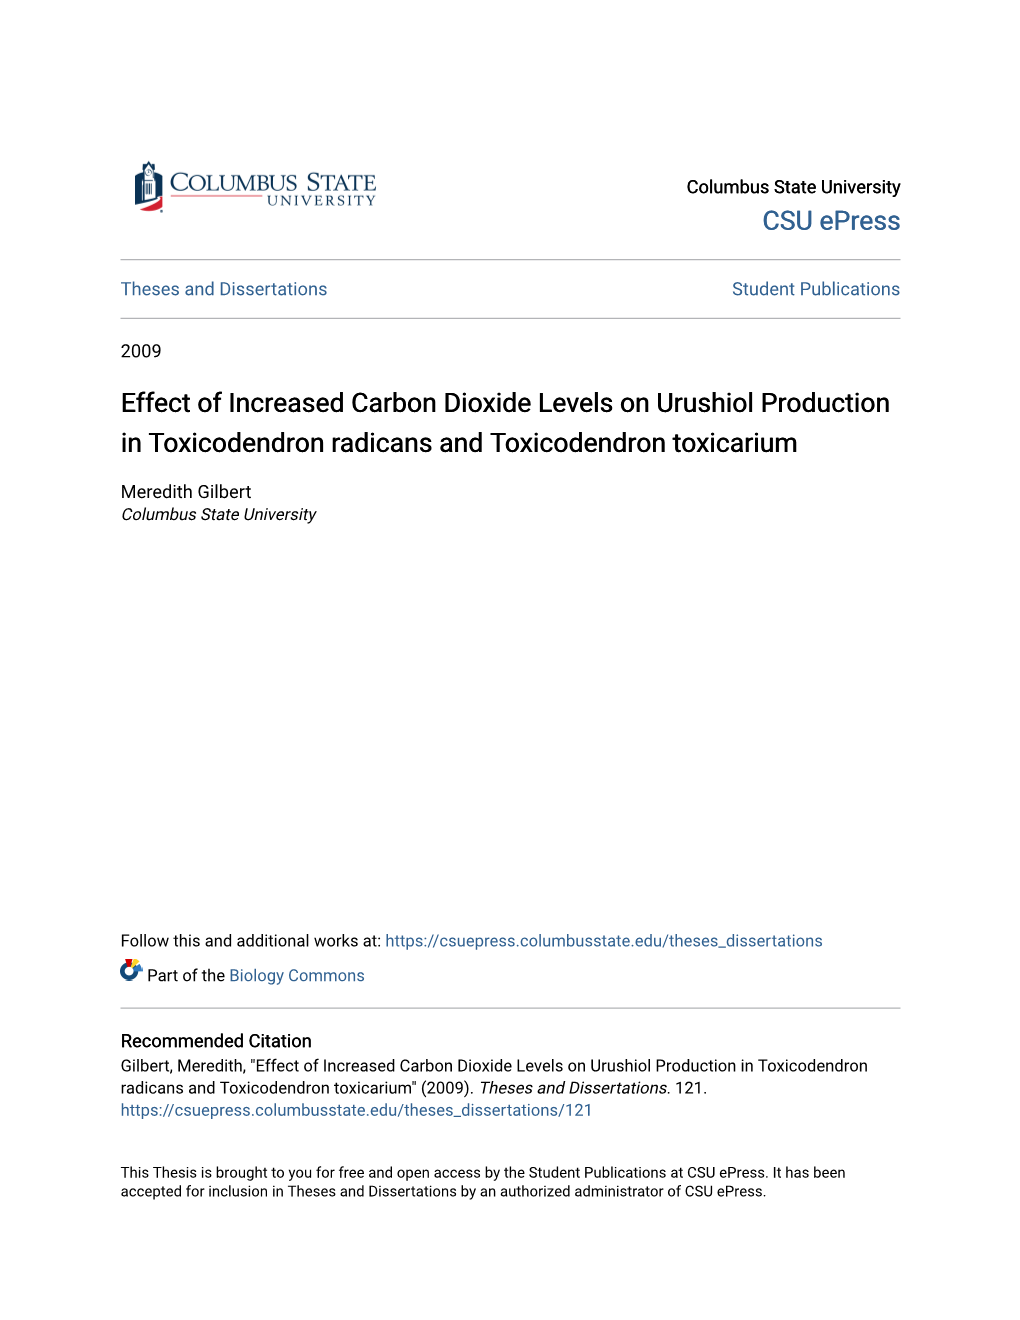 Effect of Increased Carbon Dioxide Levels on Urushiol Production in Toxicodendron Radicans and Toxicodendron Toxicarium